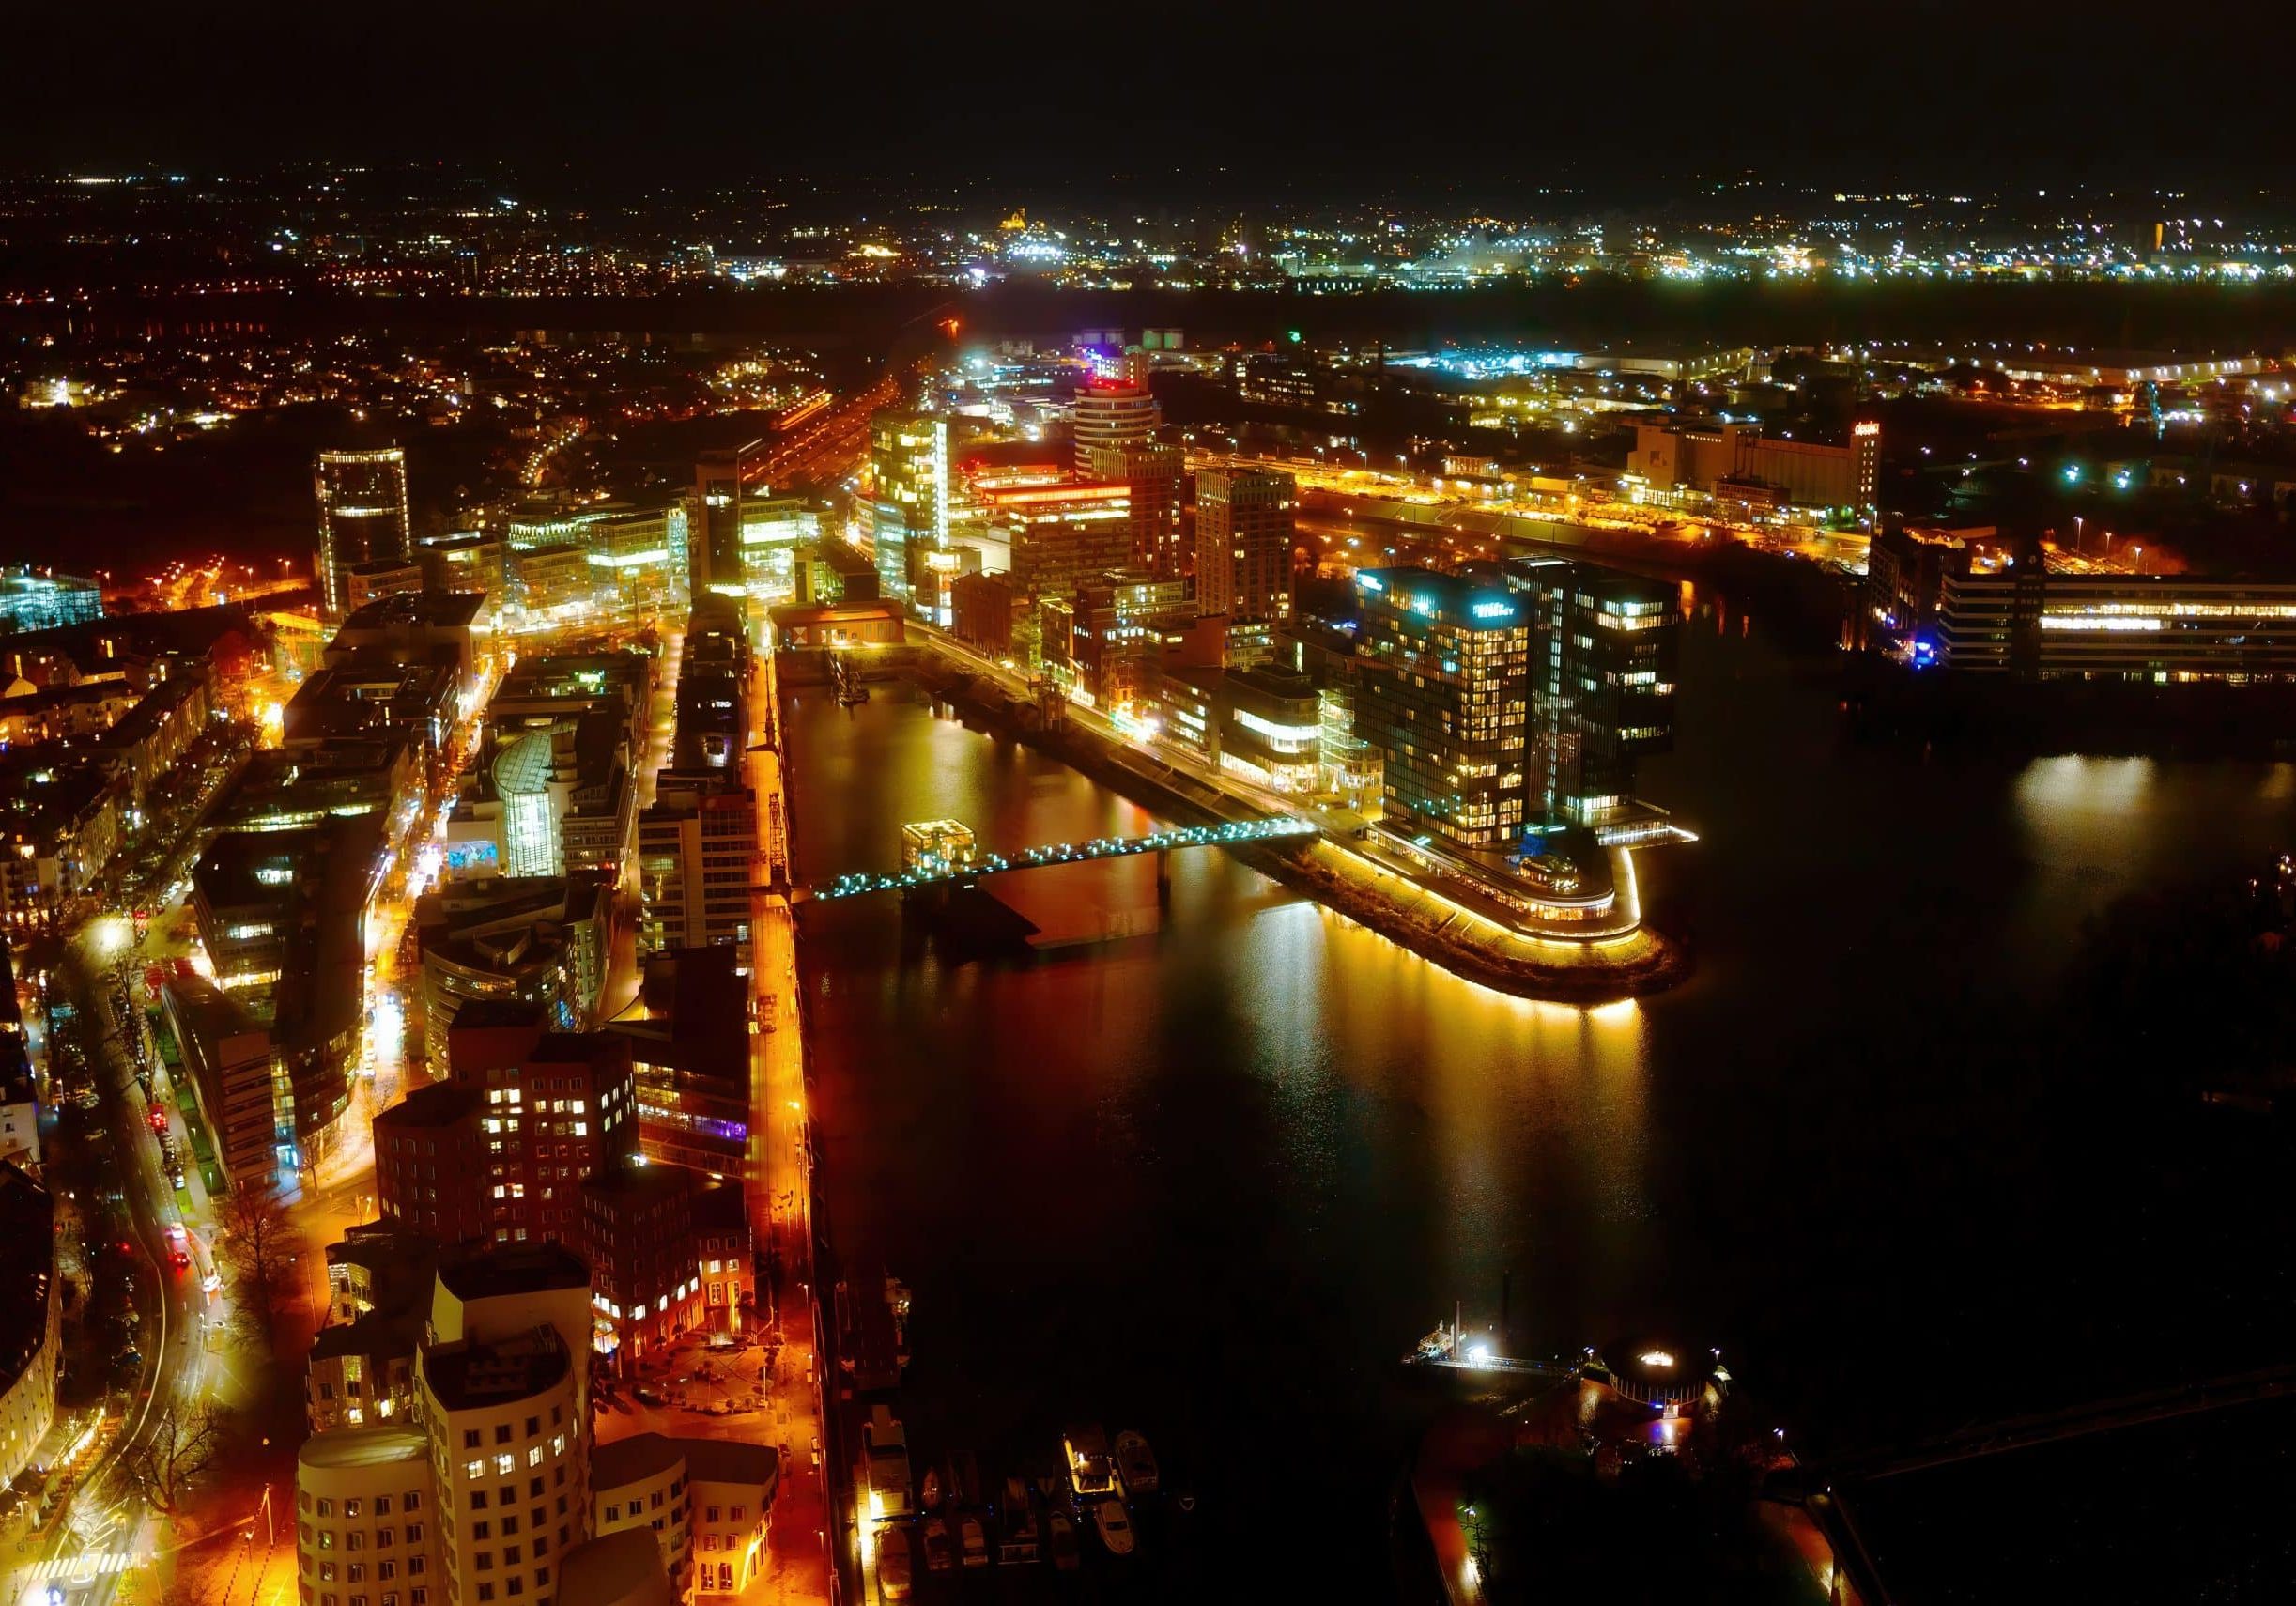 dusseldorf-areal-view-at-night-from-tv-tower-2023-11-27-05-22-29-utc(1)